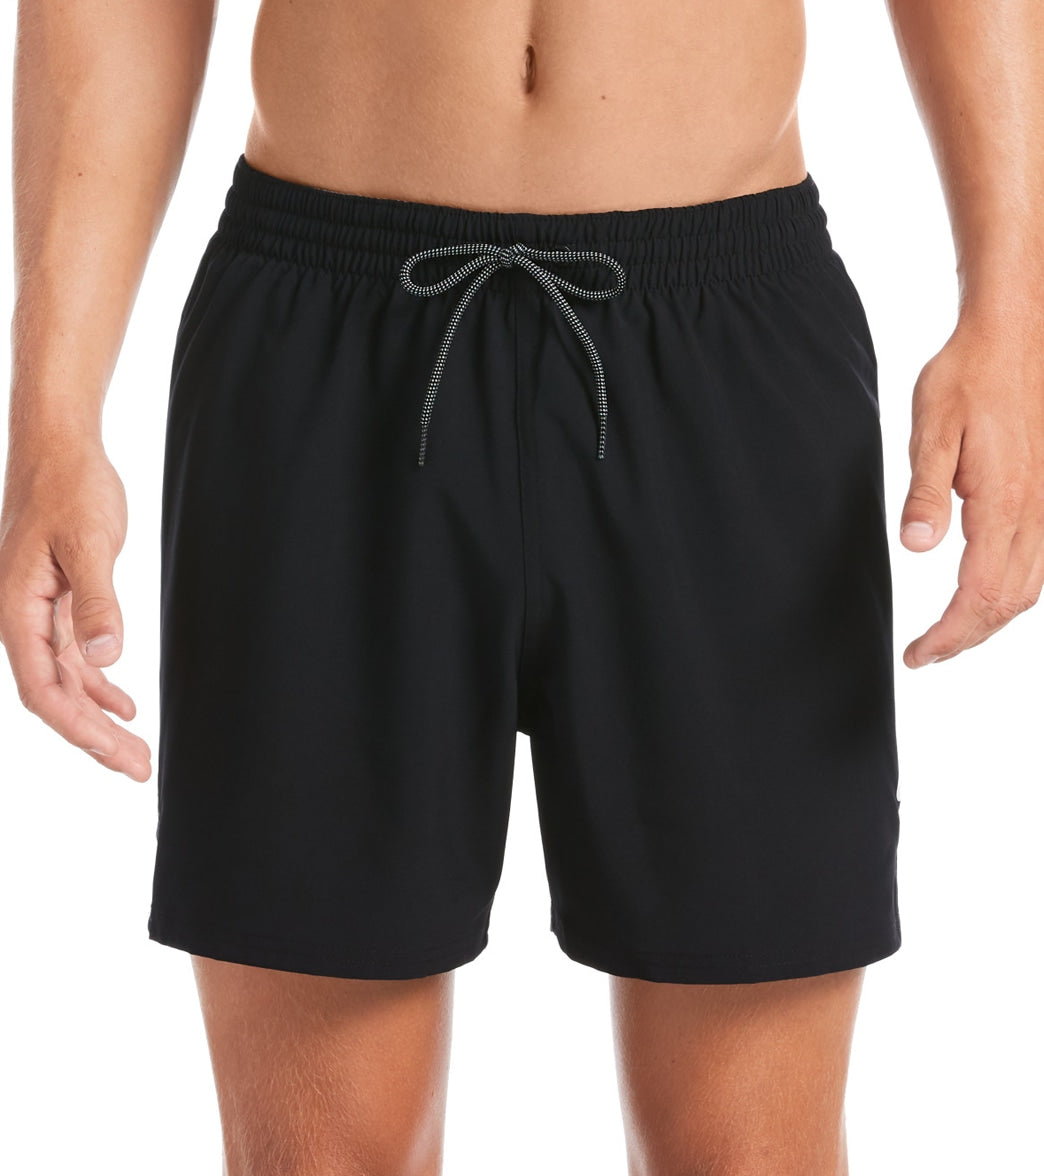 Nike Men's 16 Essential Vital Volley Short - Black Small Polyester - Swimoutlet.com